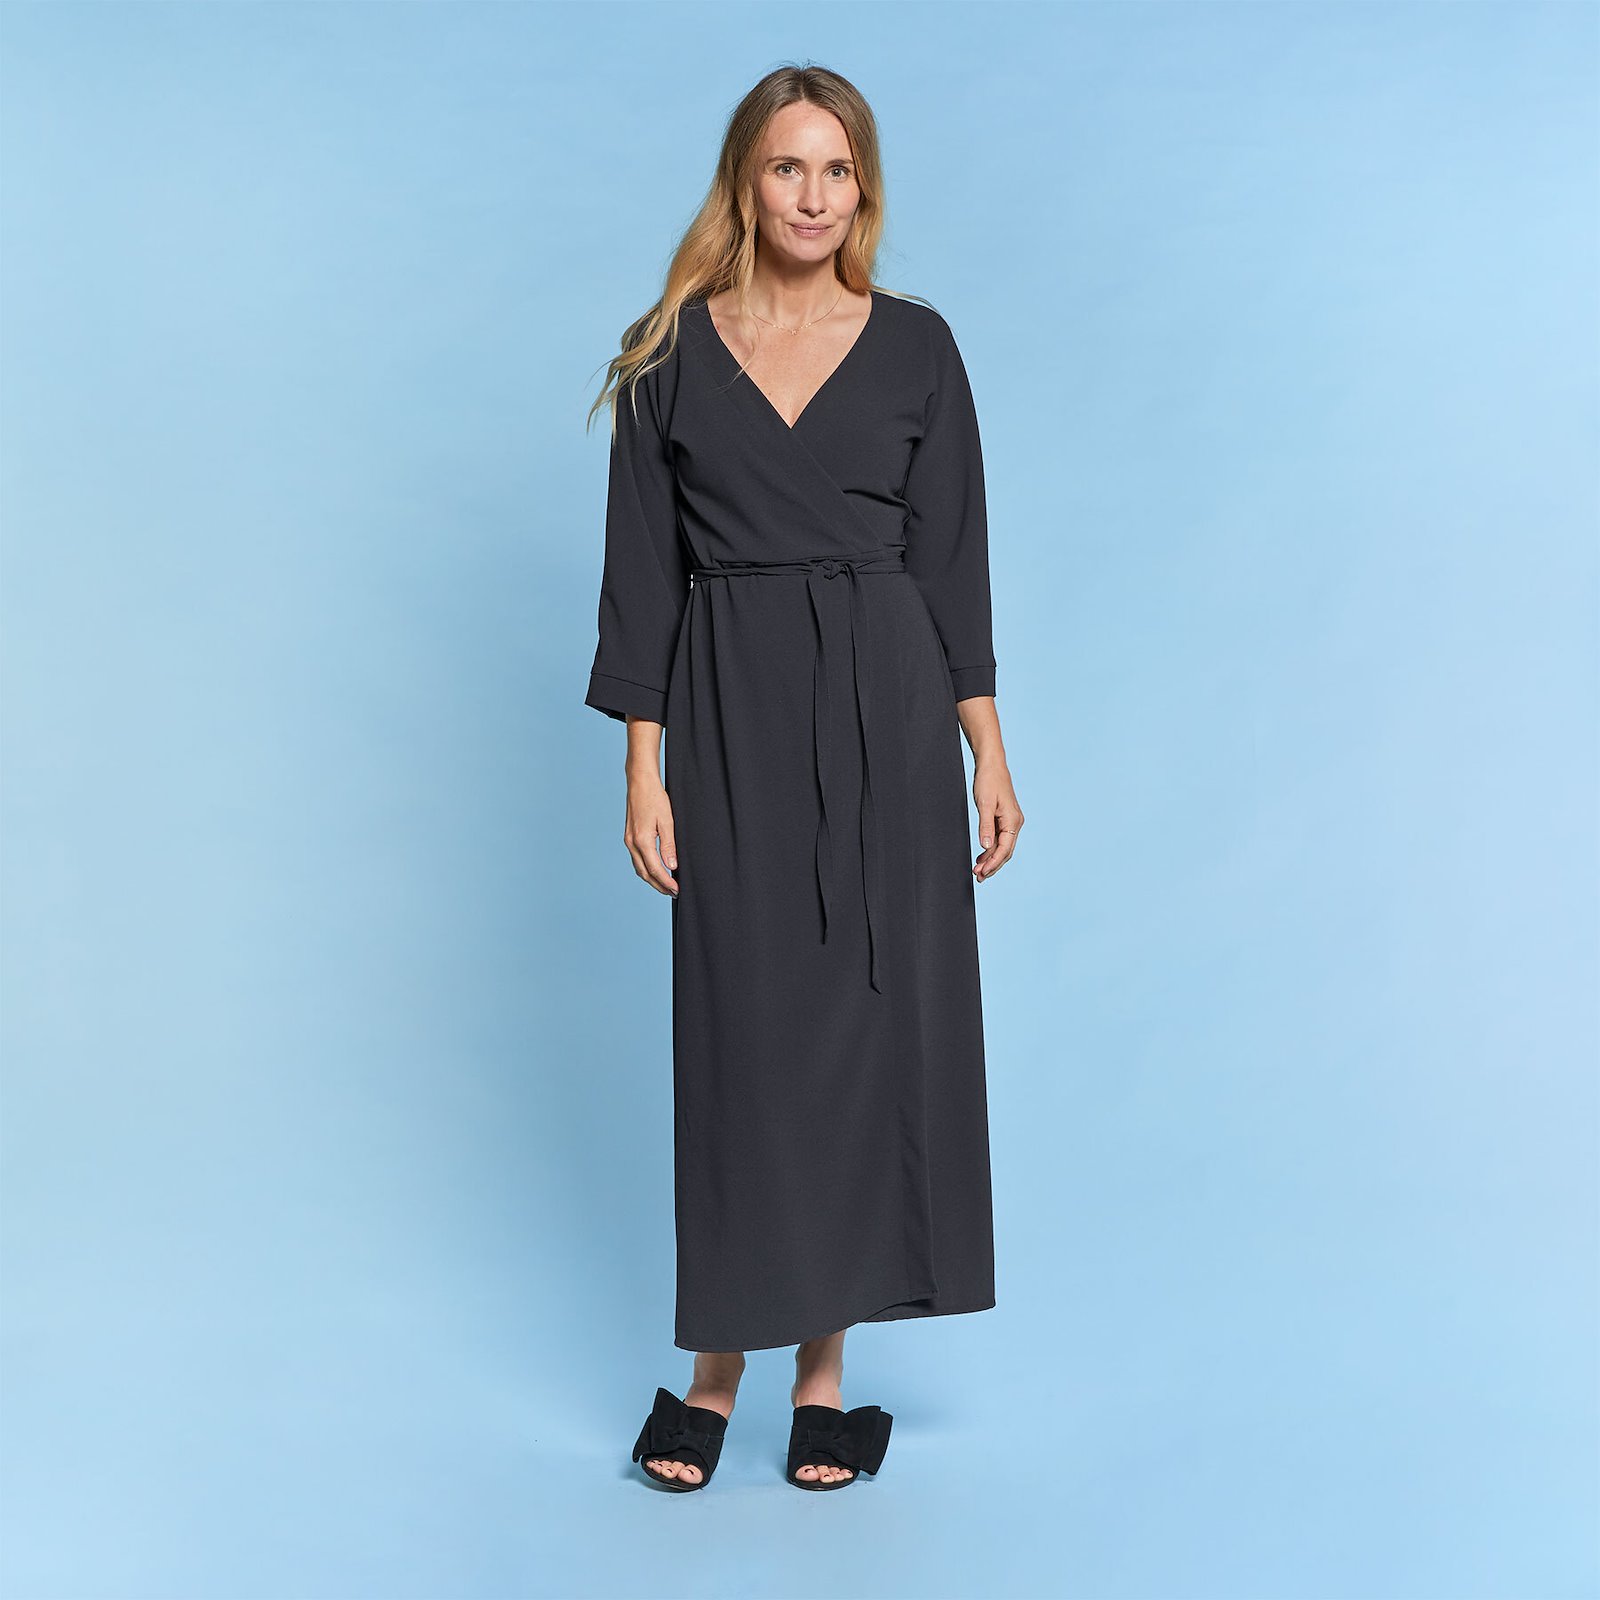 Wrap dress with batwing sleeves, 42/14 p23162000_p23162001_p23162002_p23162003_p23162004_pack_d